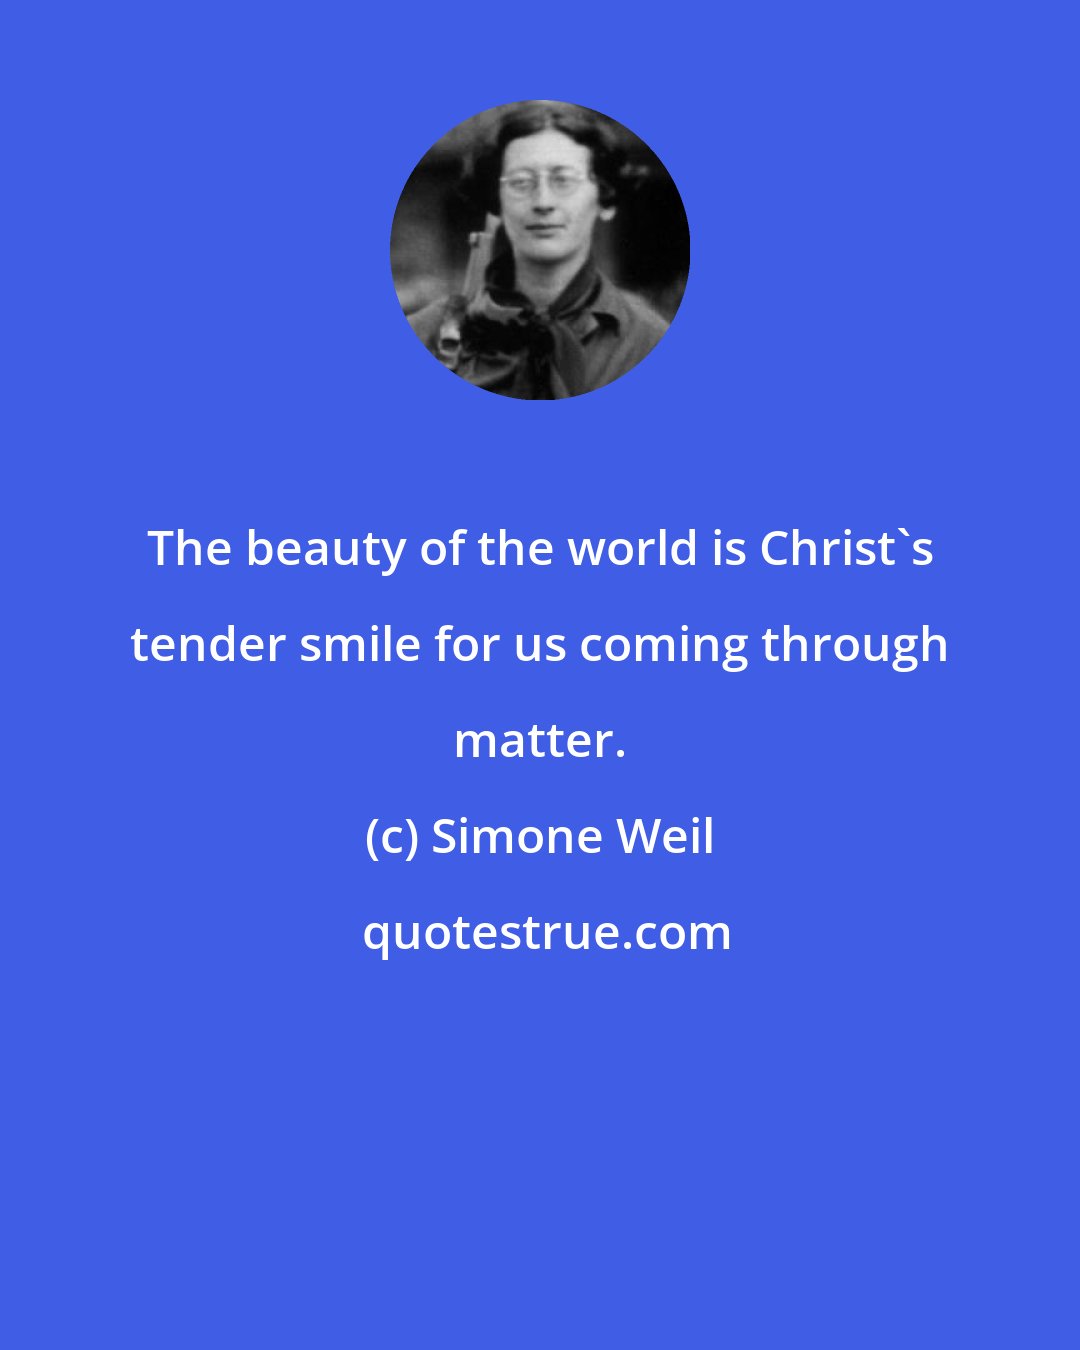 Simone Weil: The beauty of the world is Christ's tender smile for us coming through matter.